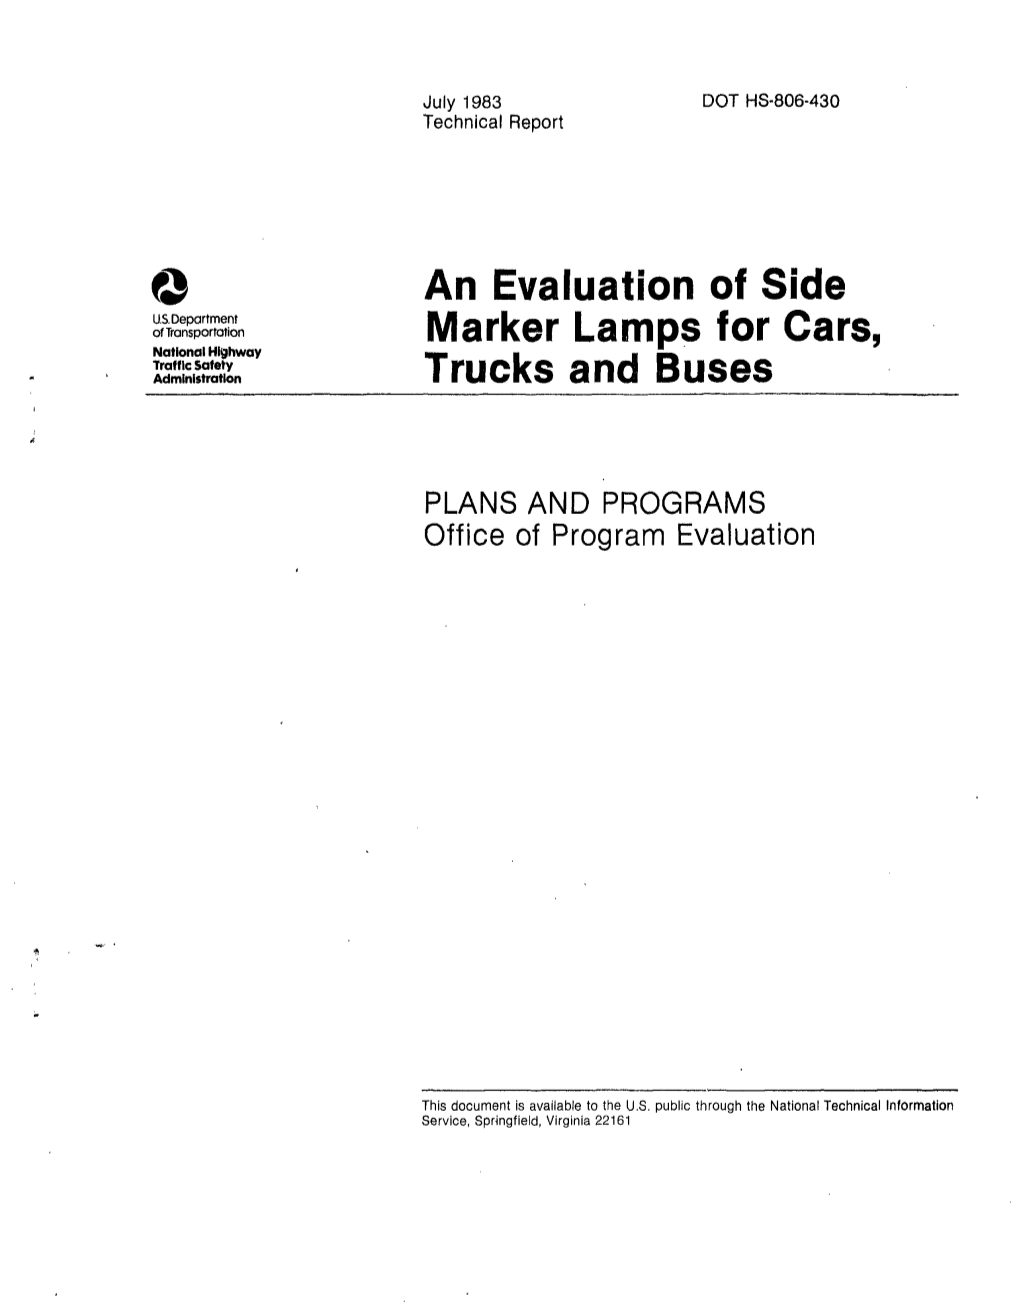 An Evaluation of Side Marker Lamps for Cars, Trucks and Buses